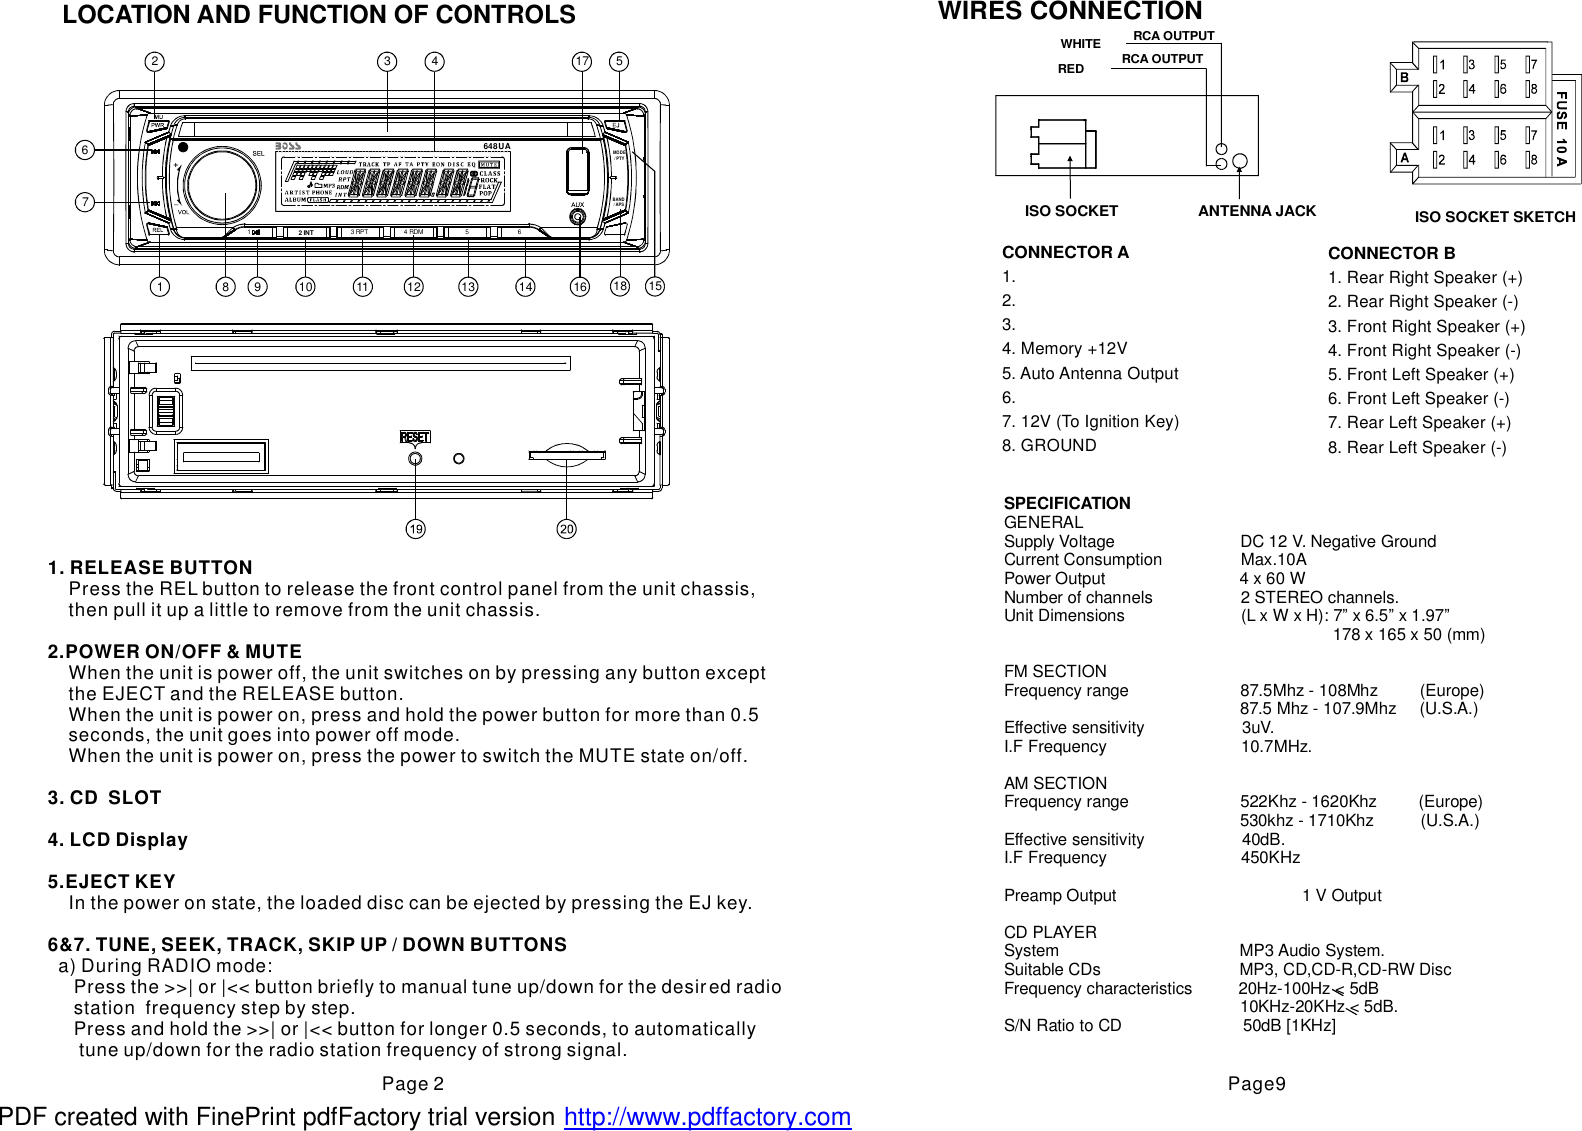 Page 2 of 5 - Boss-Audio-Systems Boss-Audio-Systems-Stereo-System-648Ua-Users-Manual- Boss 648BI Car Radio OWNER'S MANUAL Operating Instructions User  Boss-audio-systems-stereo-system-648ua-users-manual